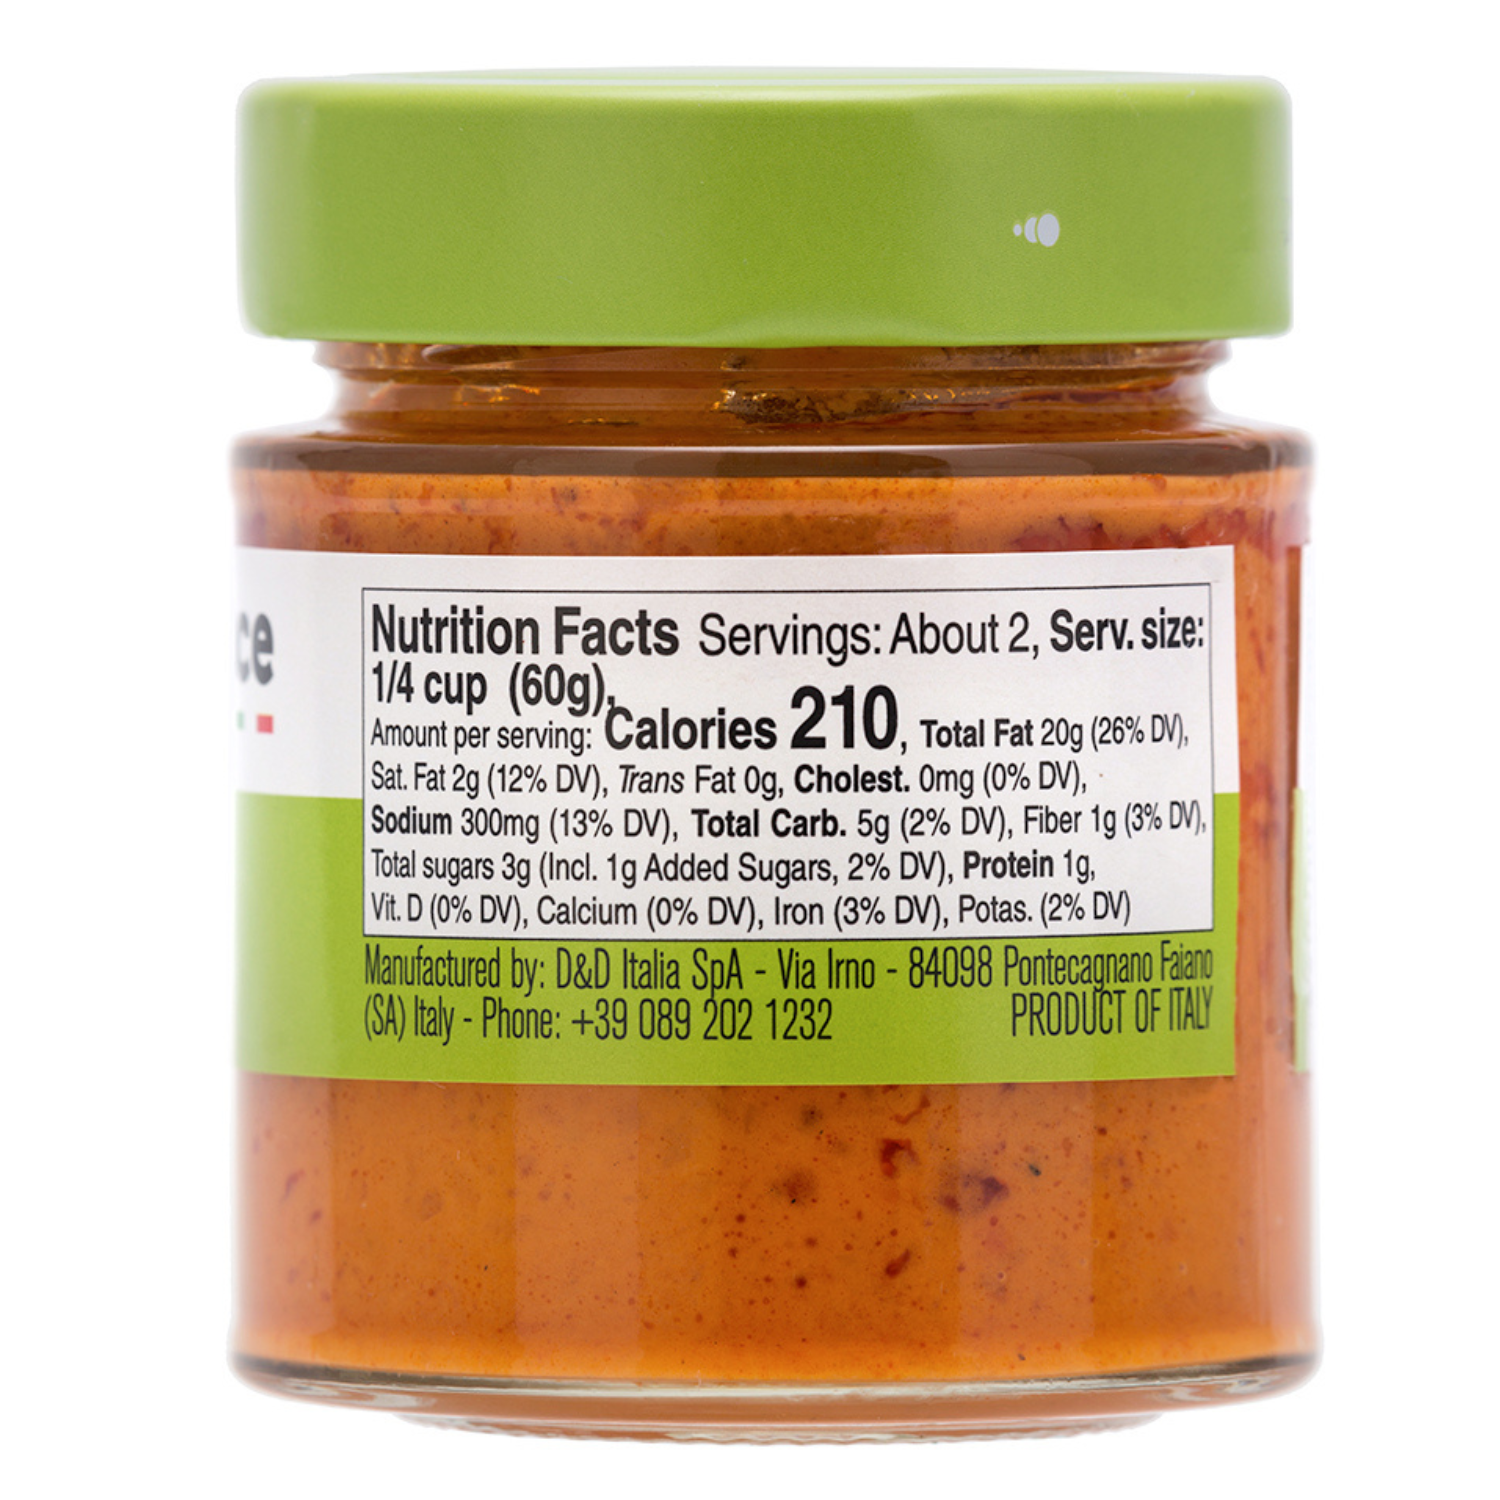 Pepper Pesto Sauce, Red Pepper Sauce, 4.06 Ounces, Product of Italy, by Fratelli D'Amico.